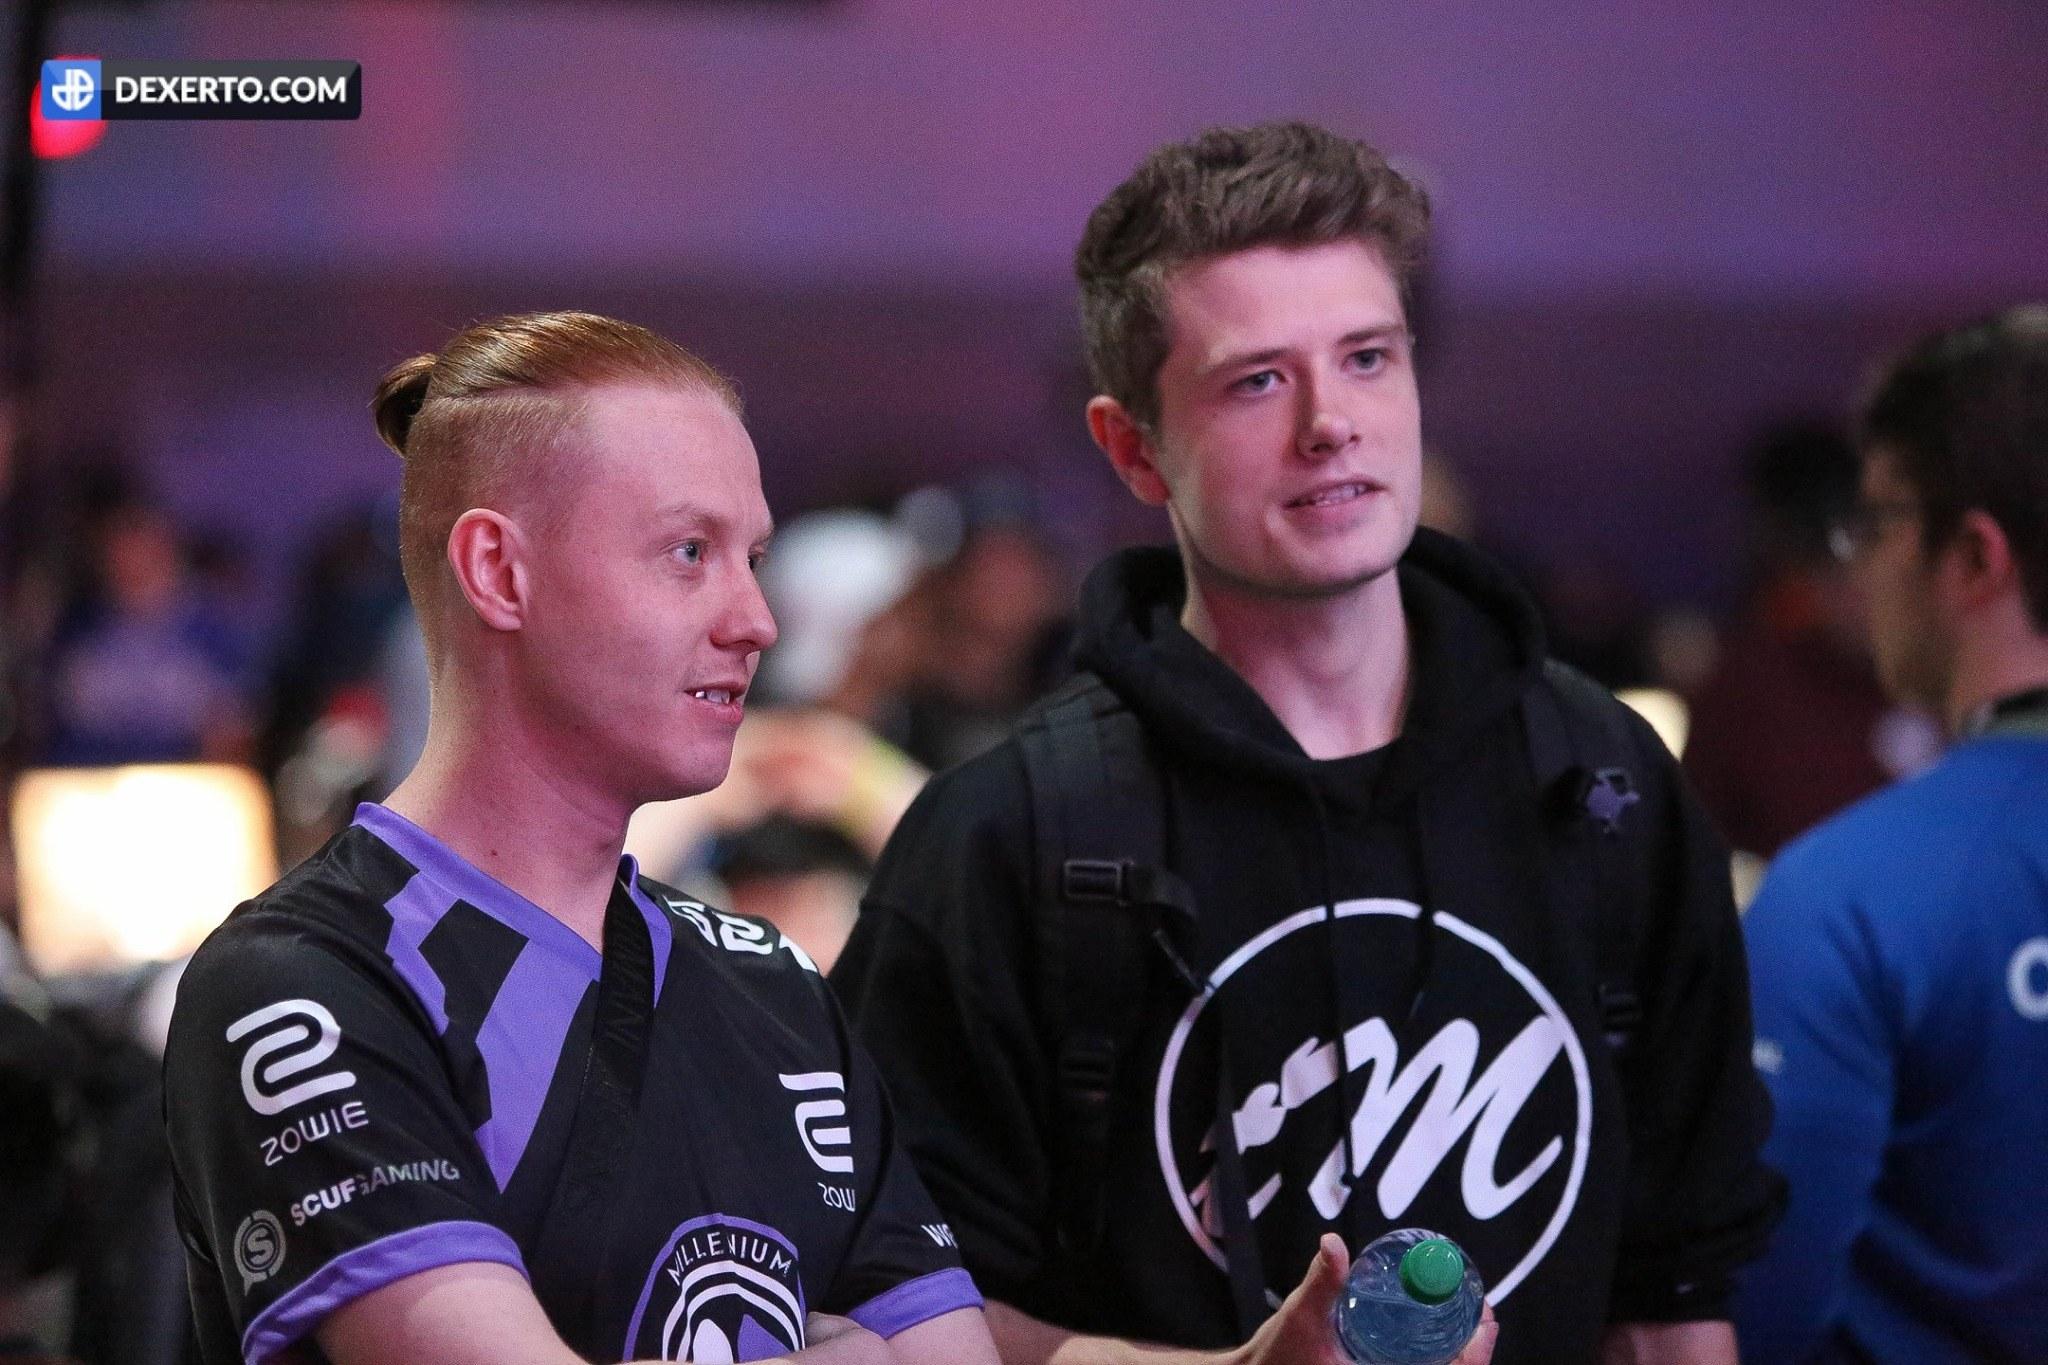 Denz (right) representing Tainted Minds during IW